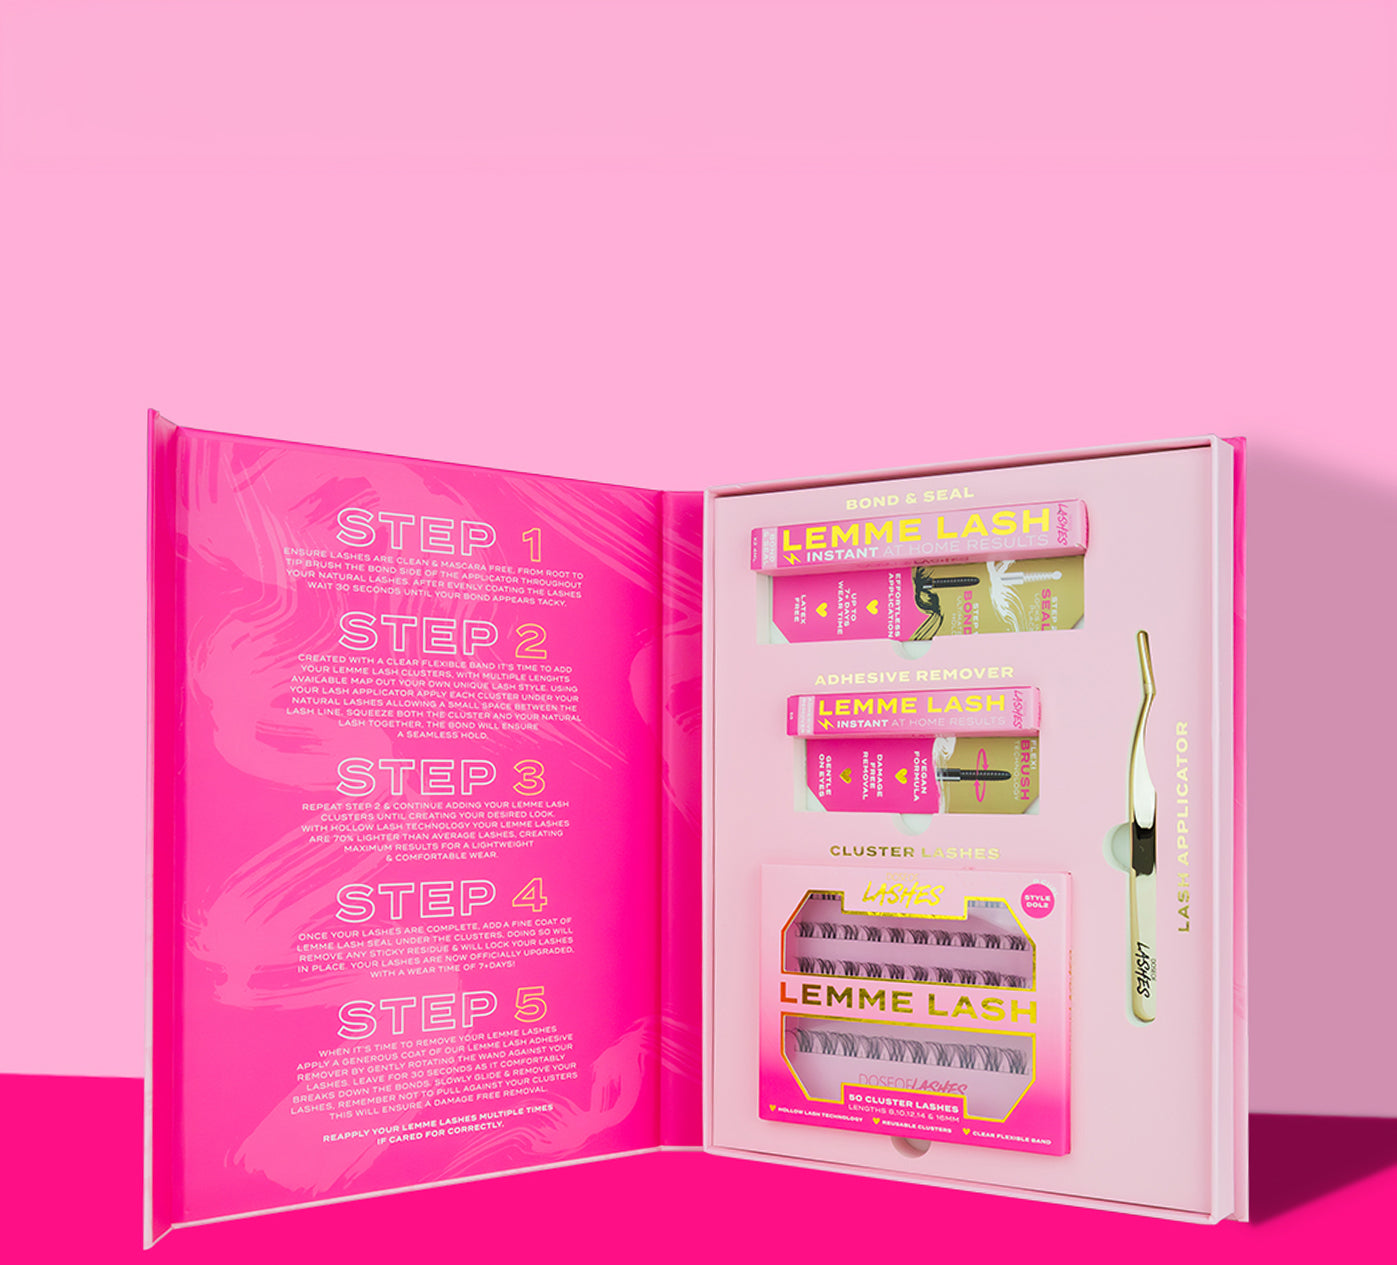 Open eyelash extension kit with labeled steps and components against a pink background.